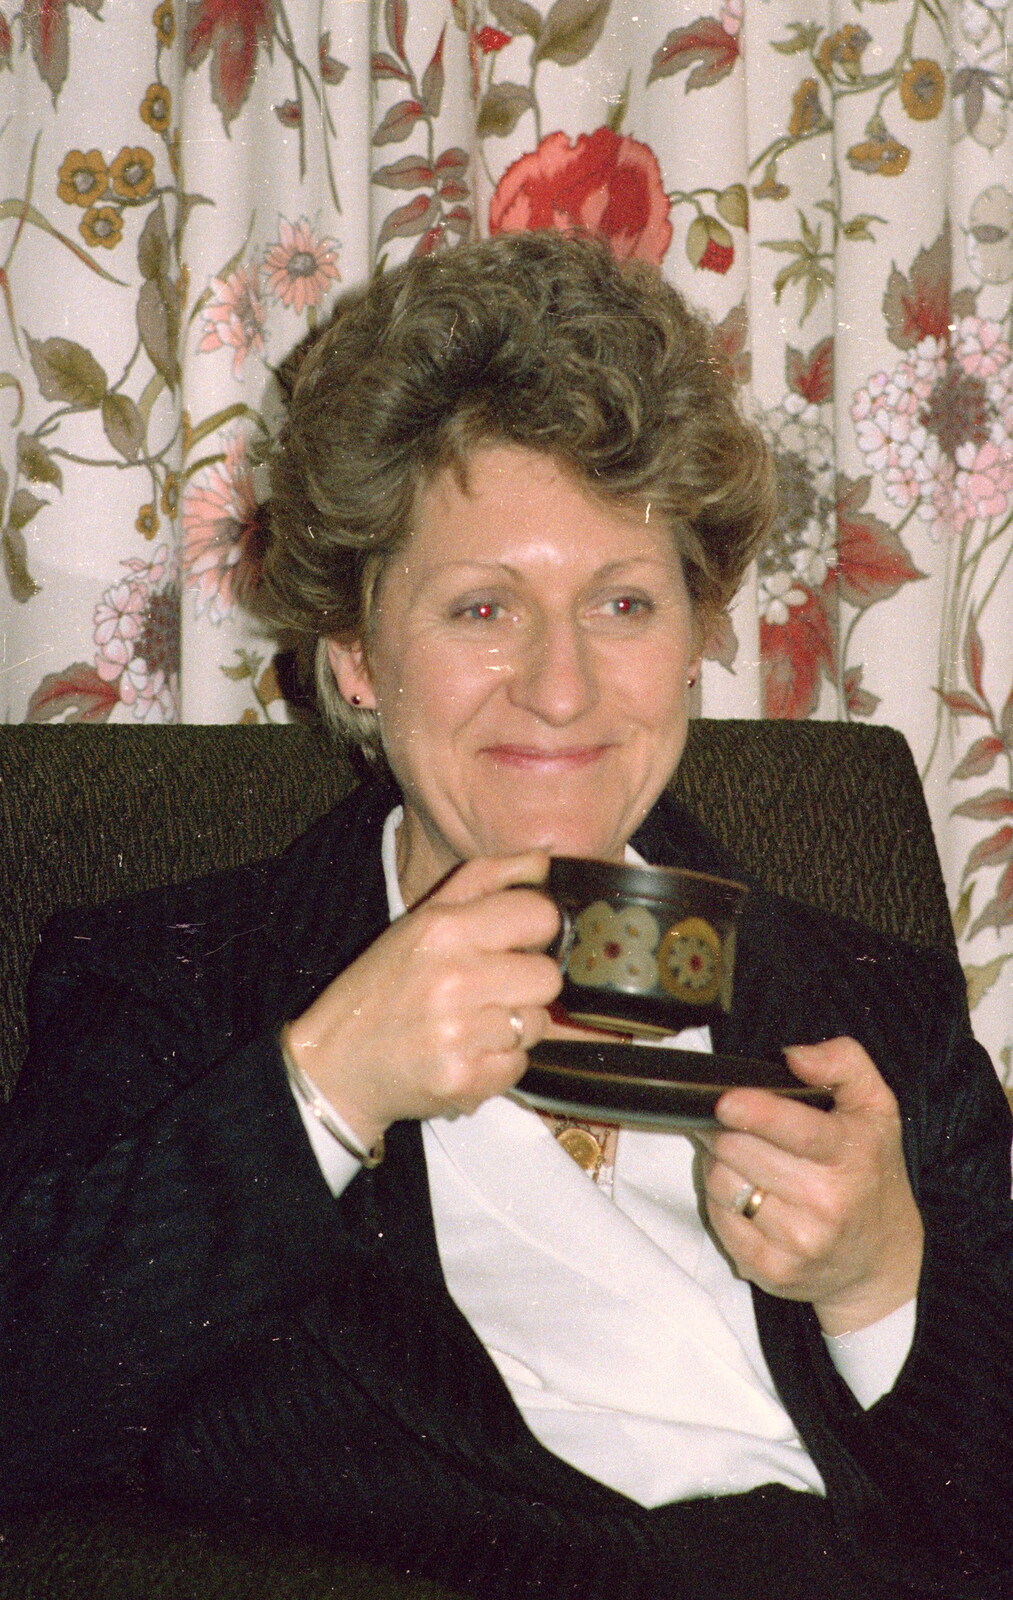 Anna's mother from New Year's Eve at Anna's, Walkford, Dorset - 31st December 1985